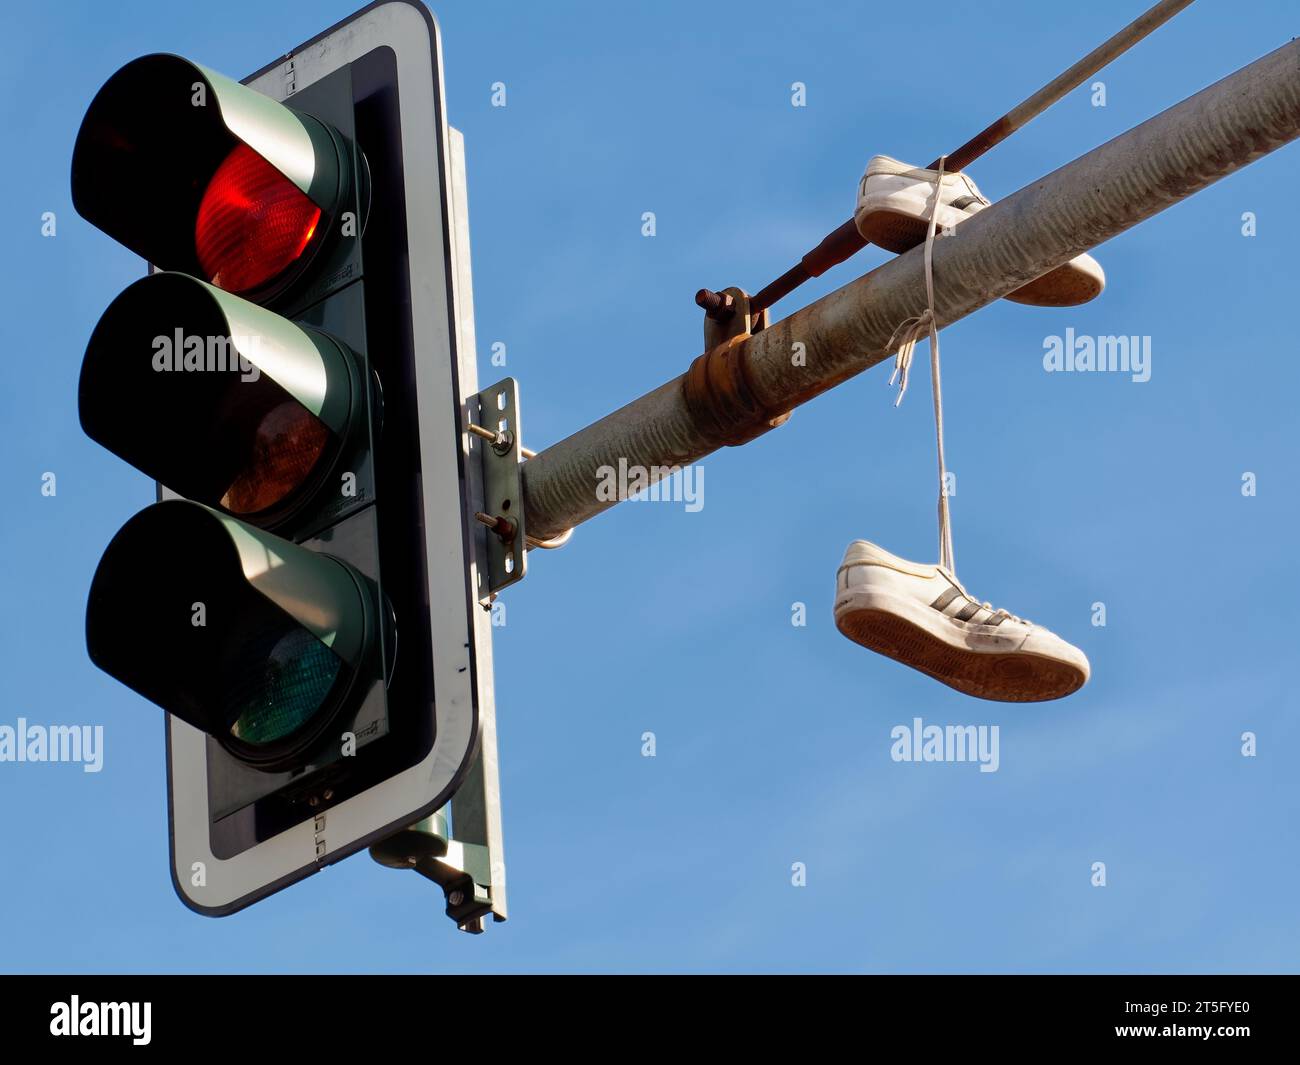 Traffic lights showing red and a pair of Adidas shoes hanging on the traffic light pole against a blue sky at Frankfurter Tor in Berlin. Stock Photo